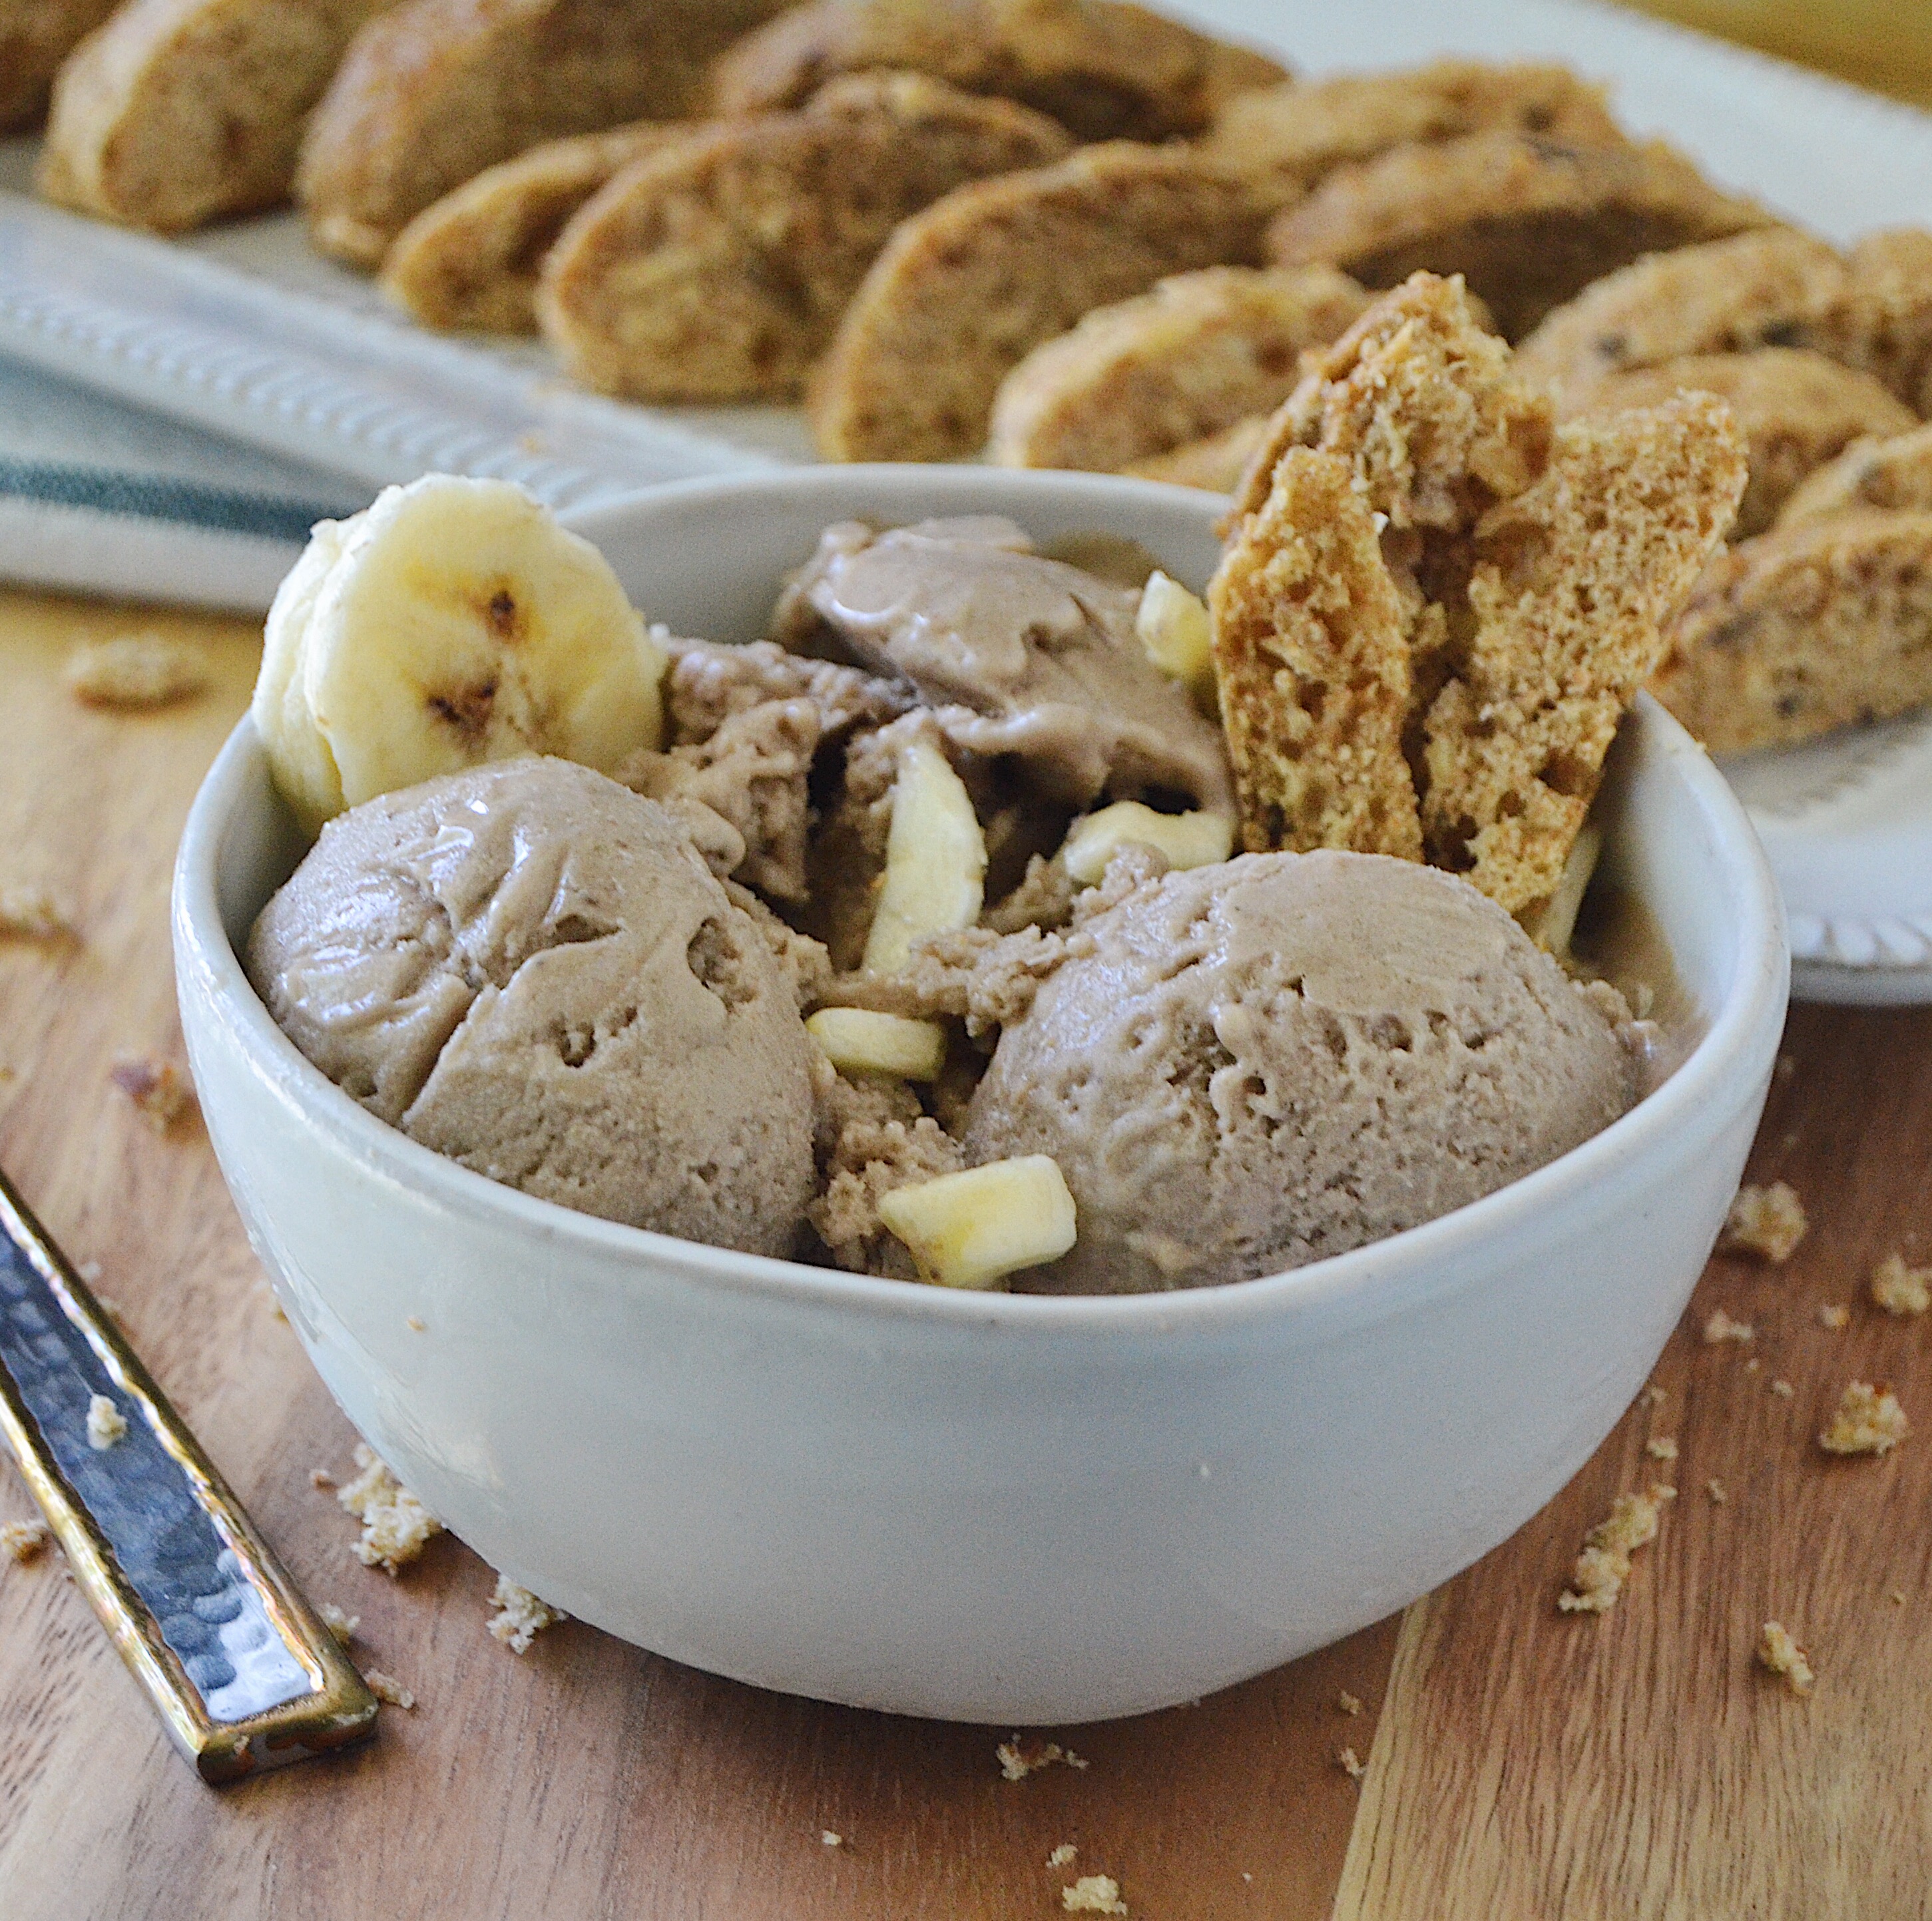 Banana Peanut Butter Ice Cream for your dog